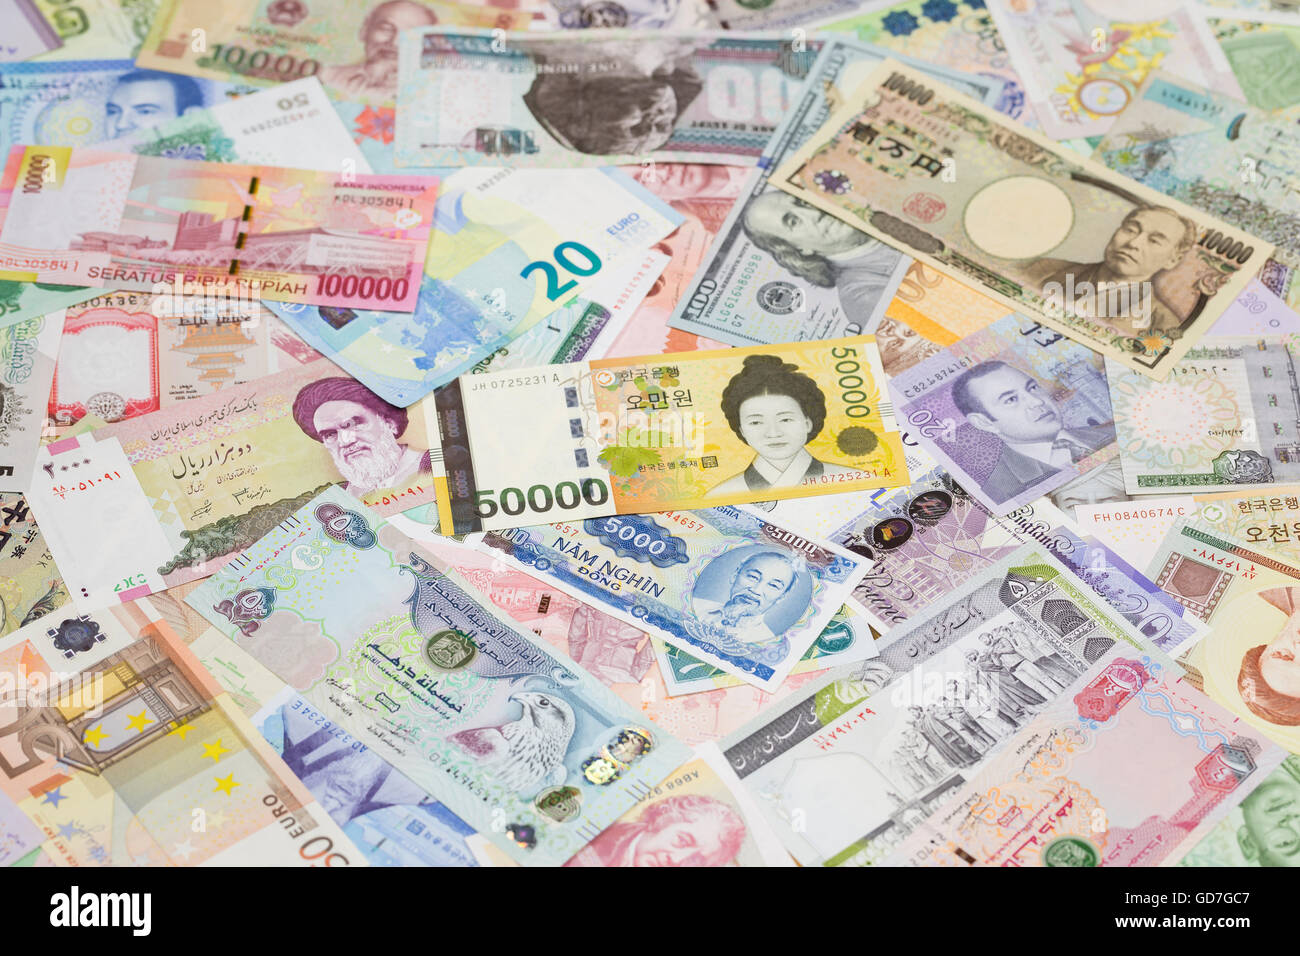 International currency banknotes Stock Photo